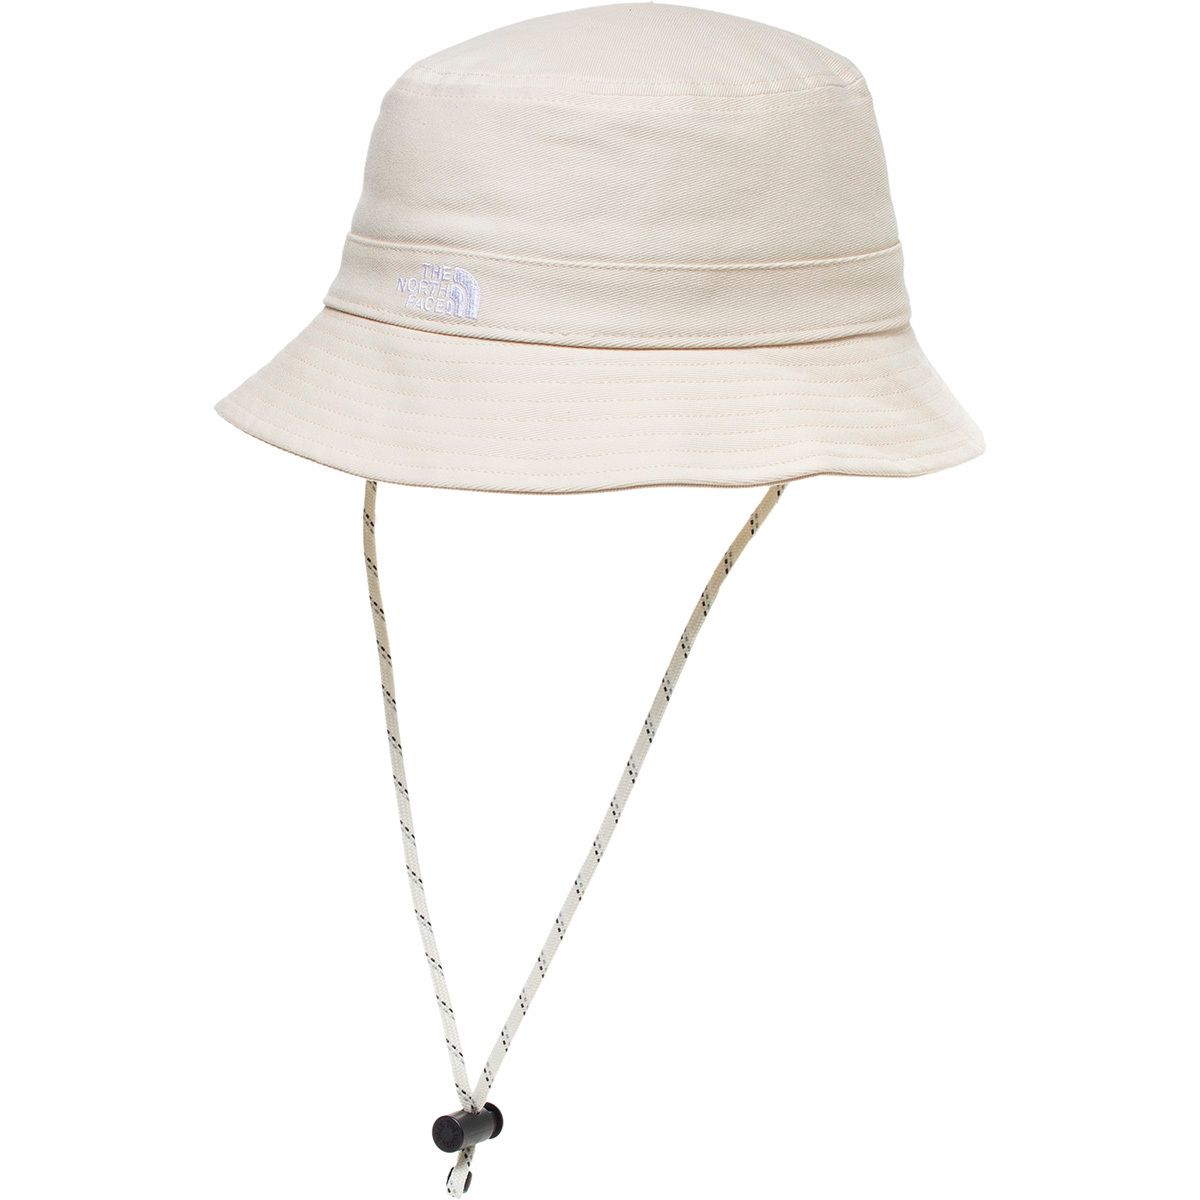 The North Face Mountain Bucket Hat | Backcountry.com